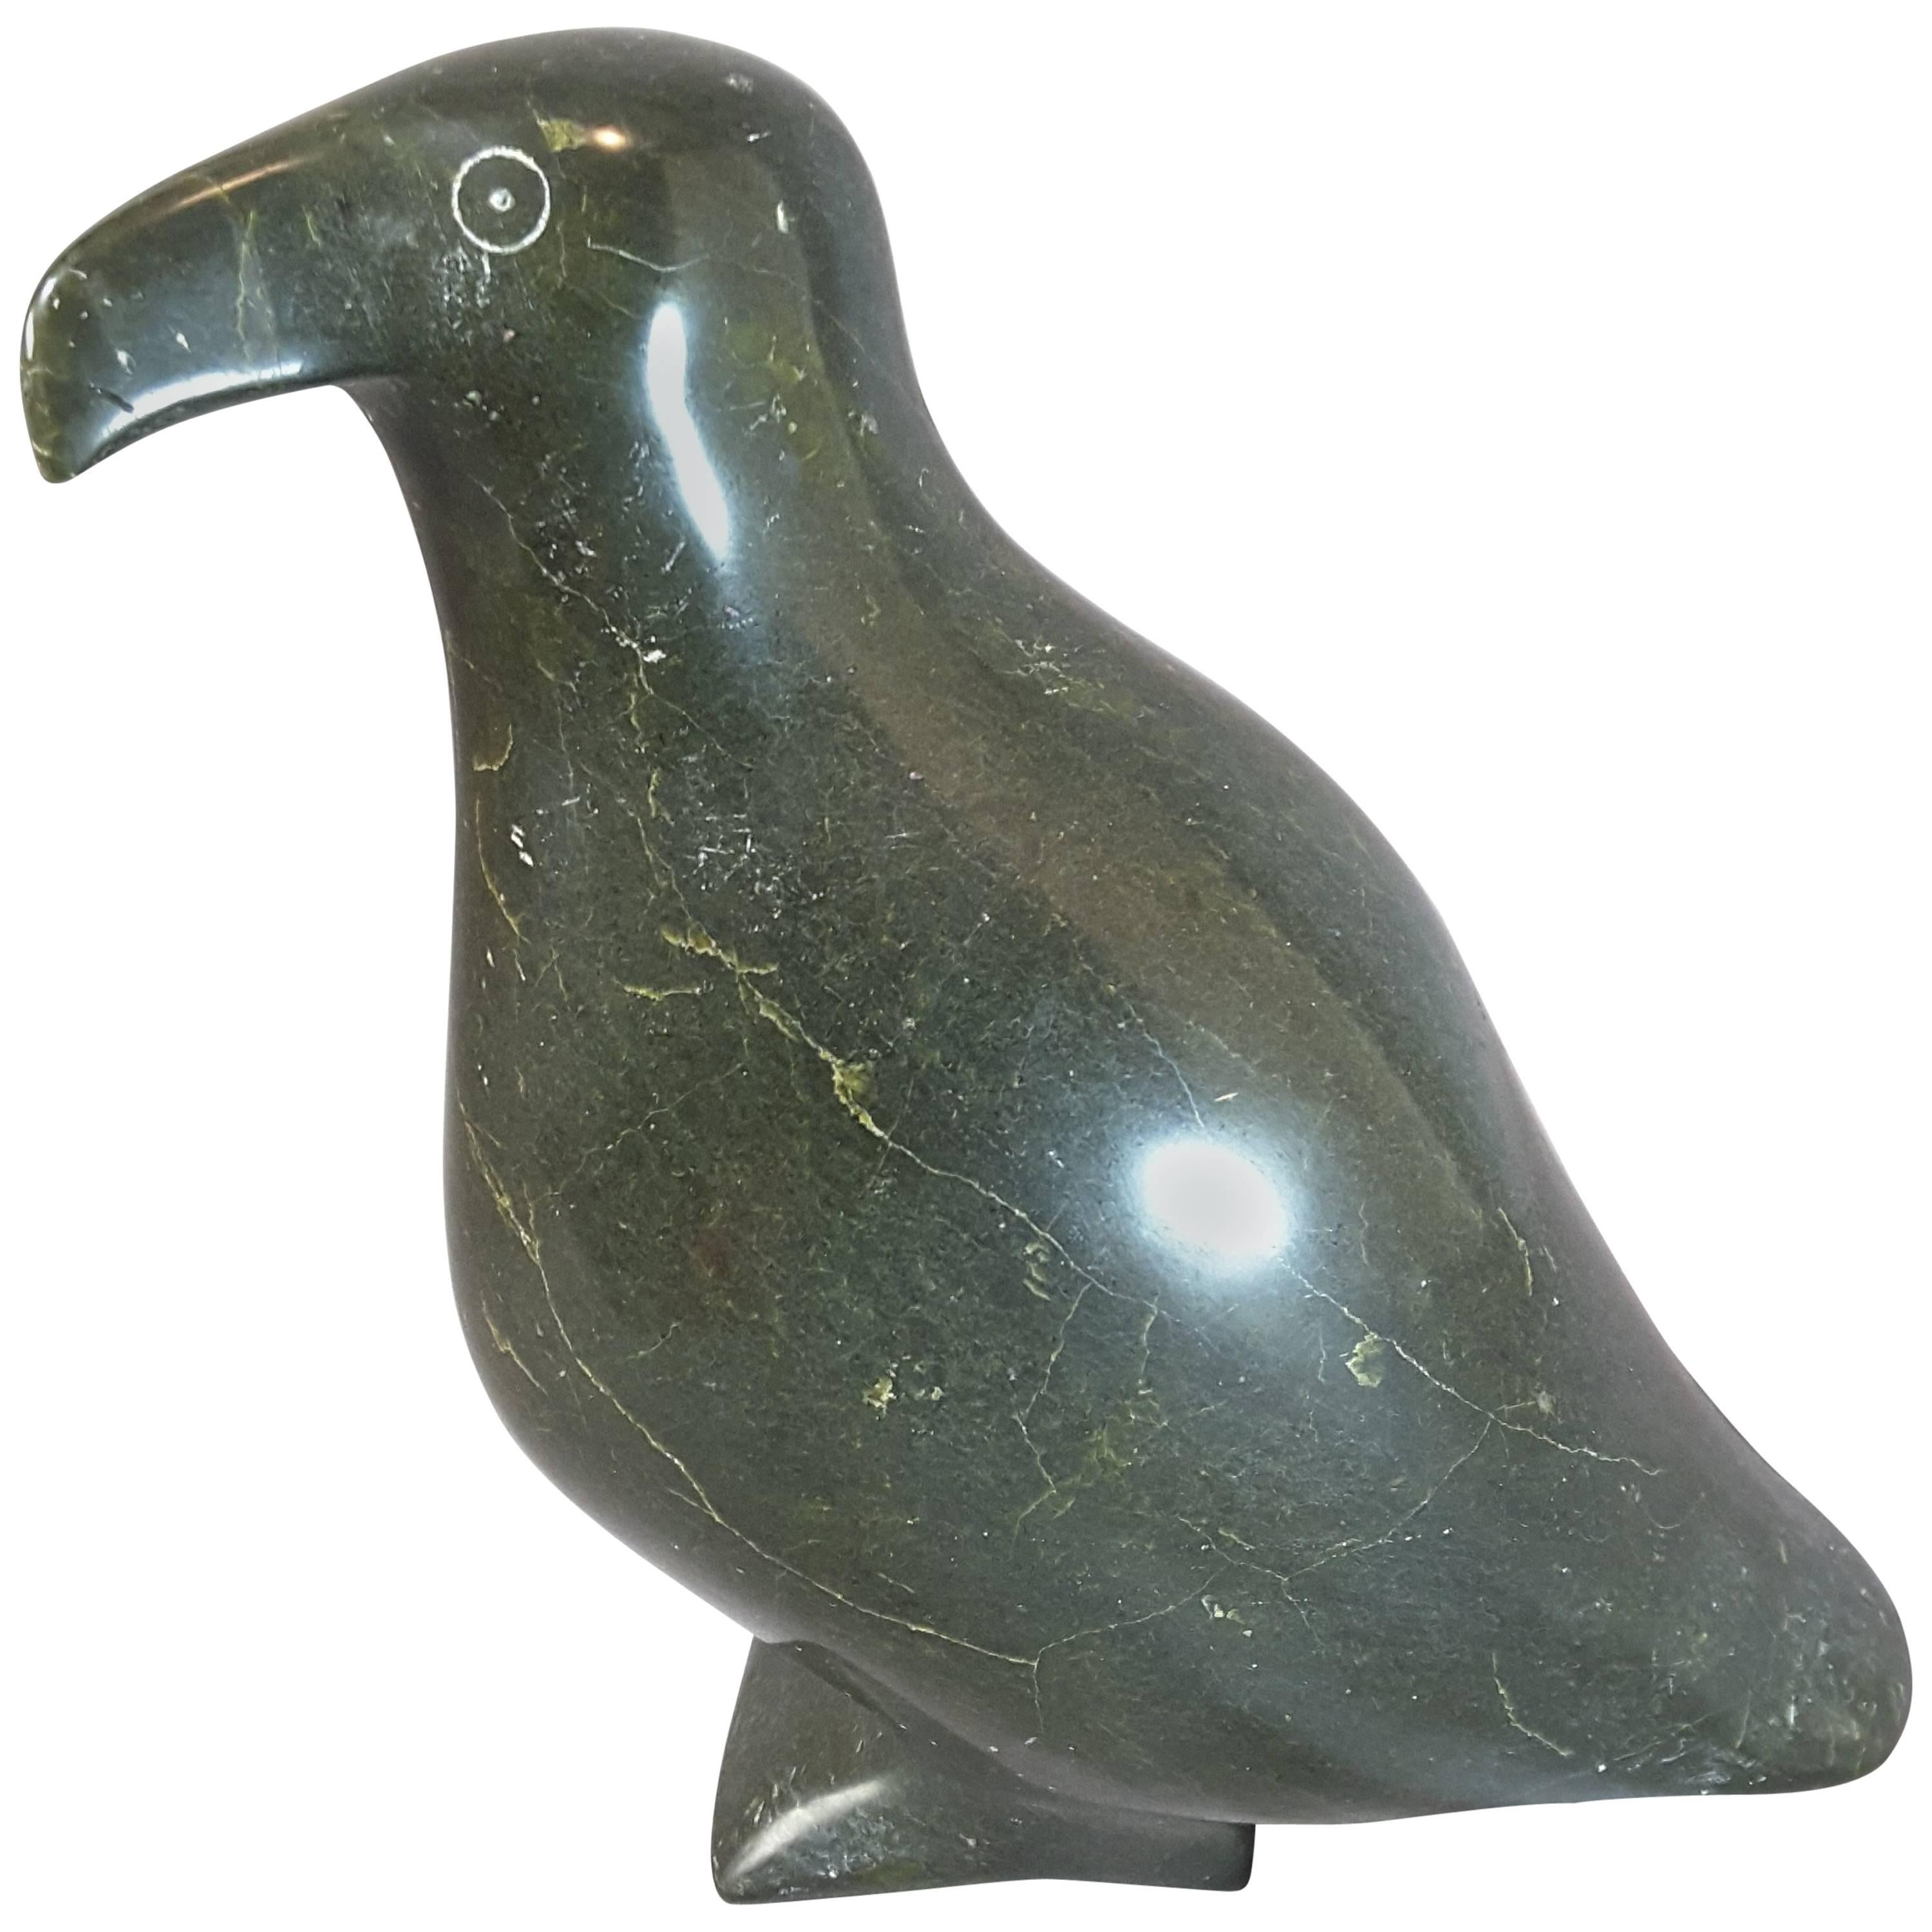 Large Soapstone Puffin Bird Sculpture, Marked  E 5516 For Sale